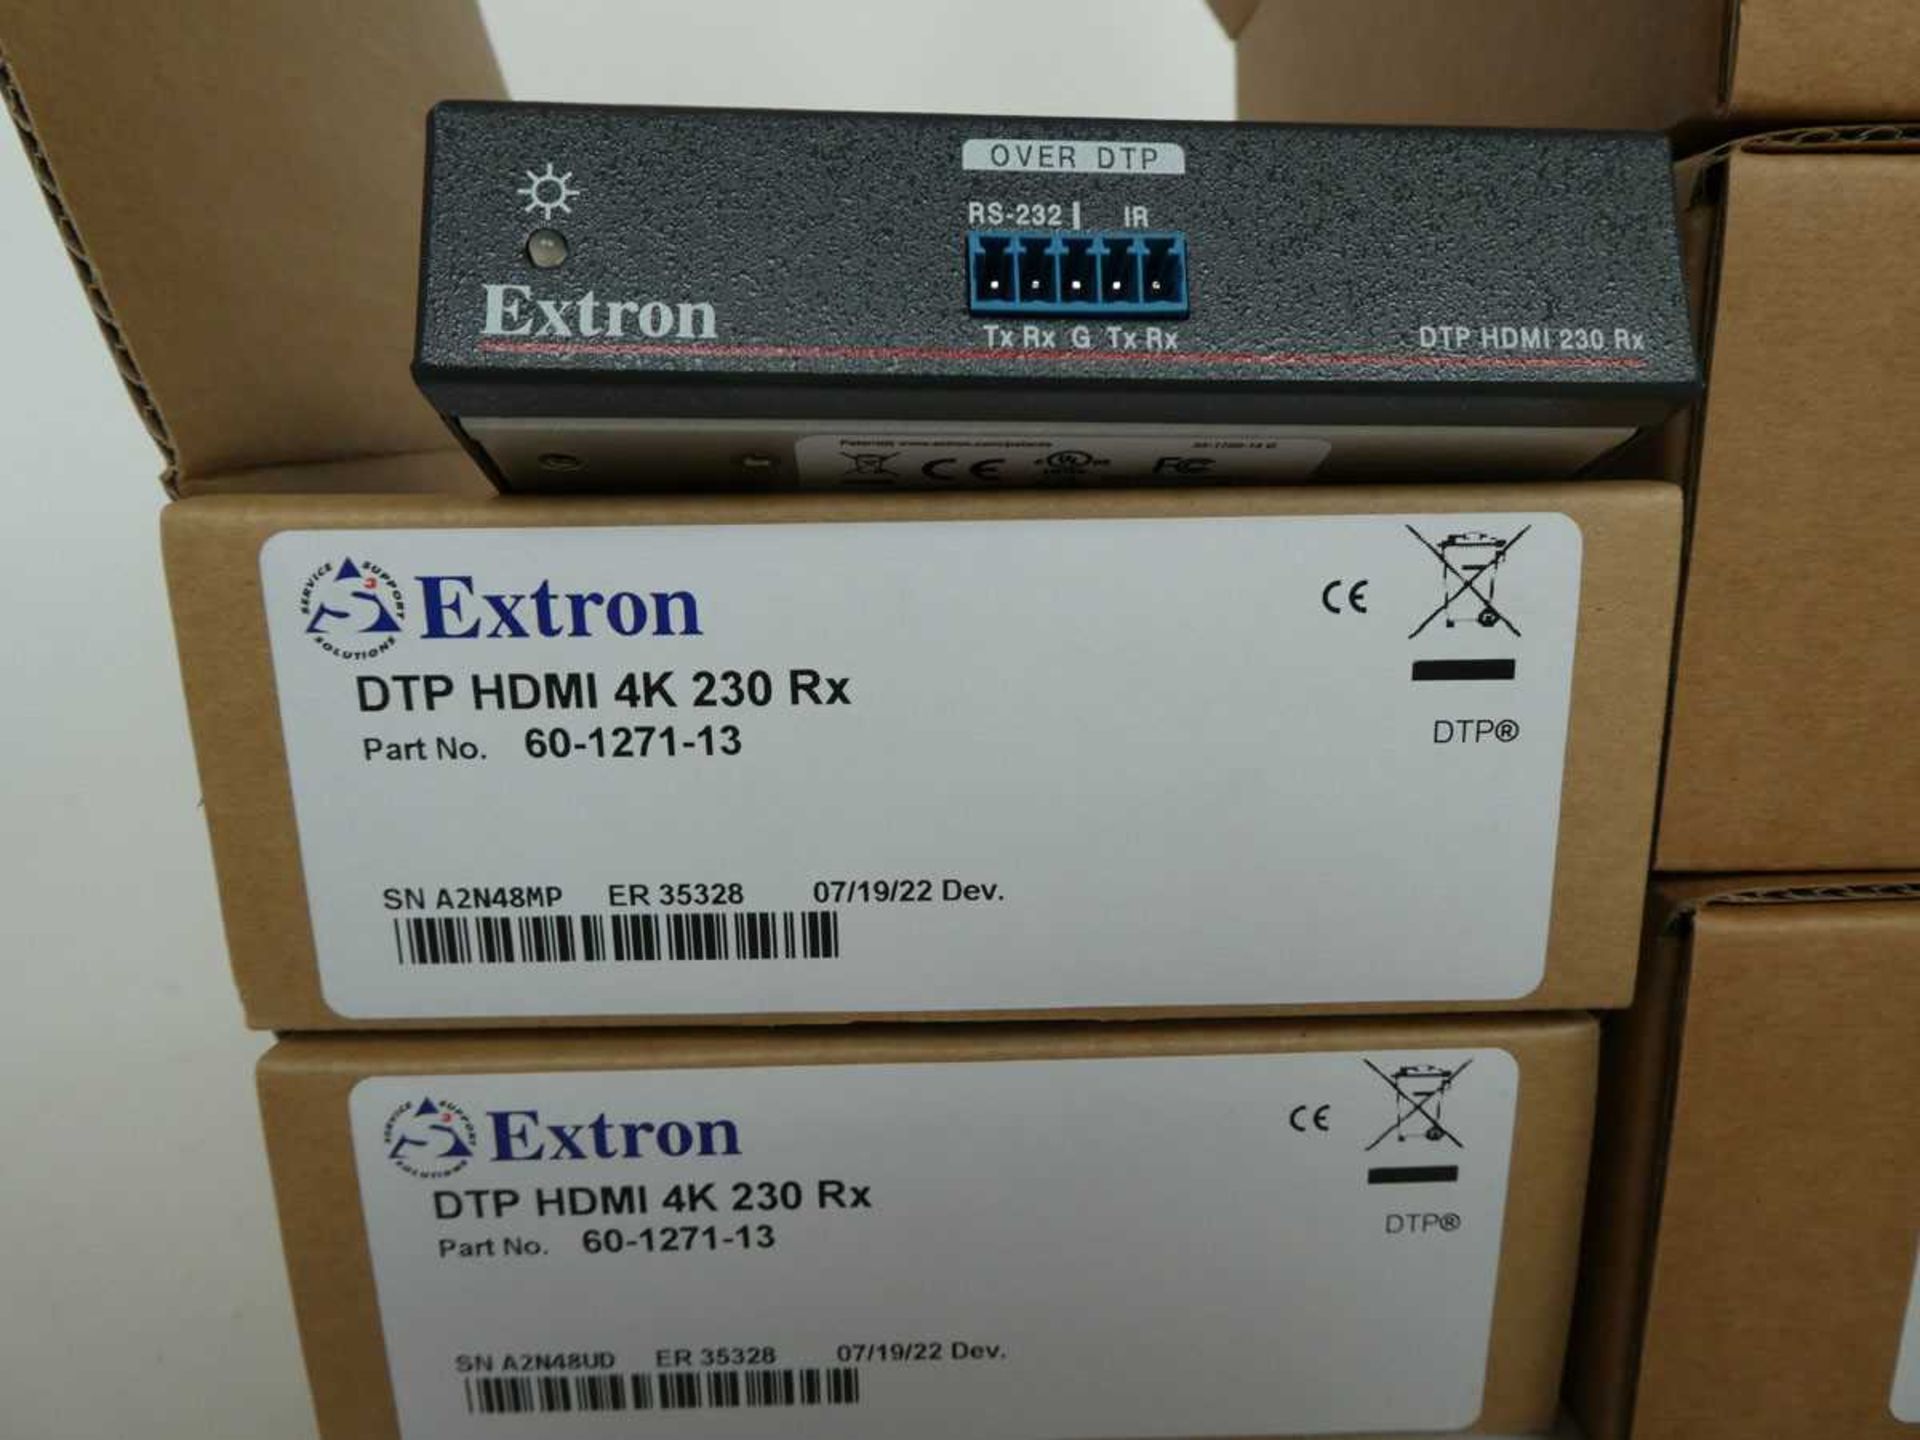 +VAT 5x boxes including 3 Extron DTP HDMI 4K 230 TX transmitters with power supply and boxes, and - Bild 2 aus 6